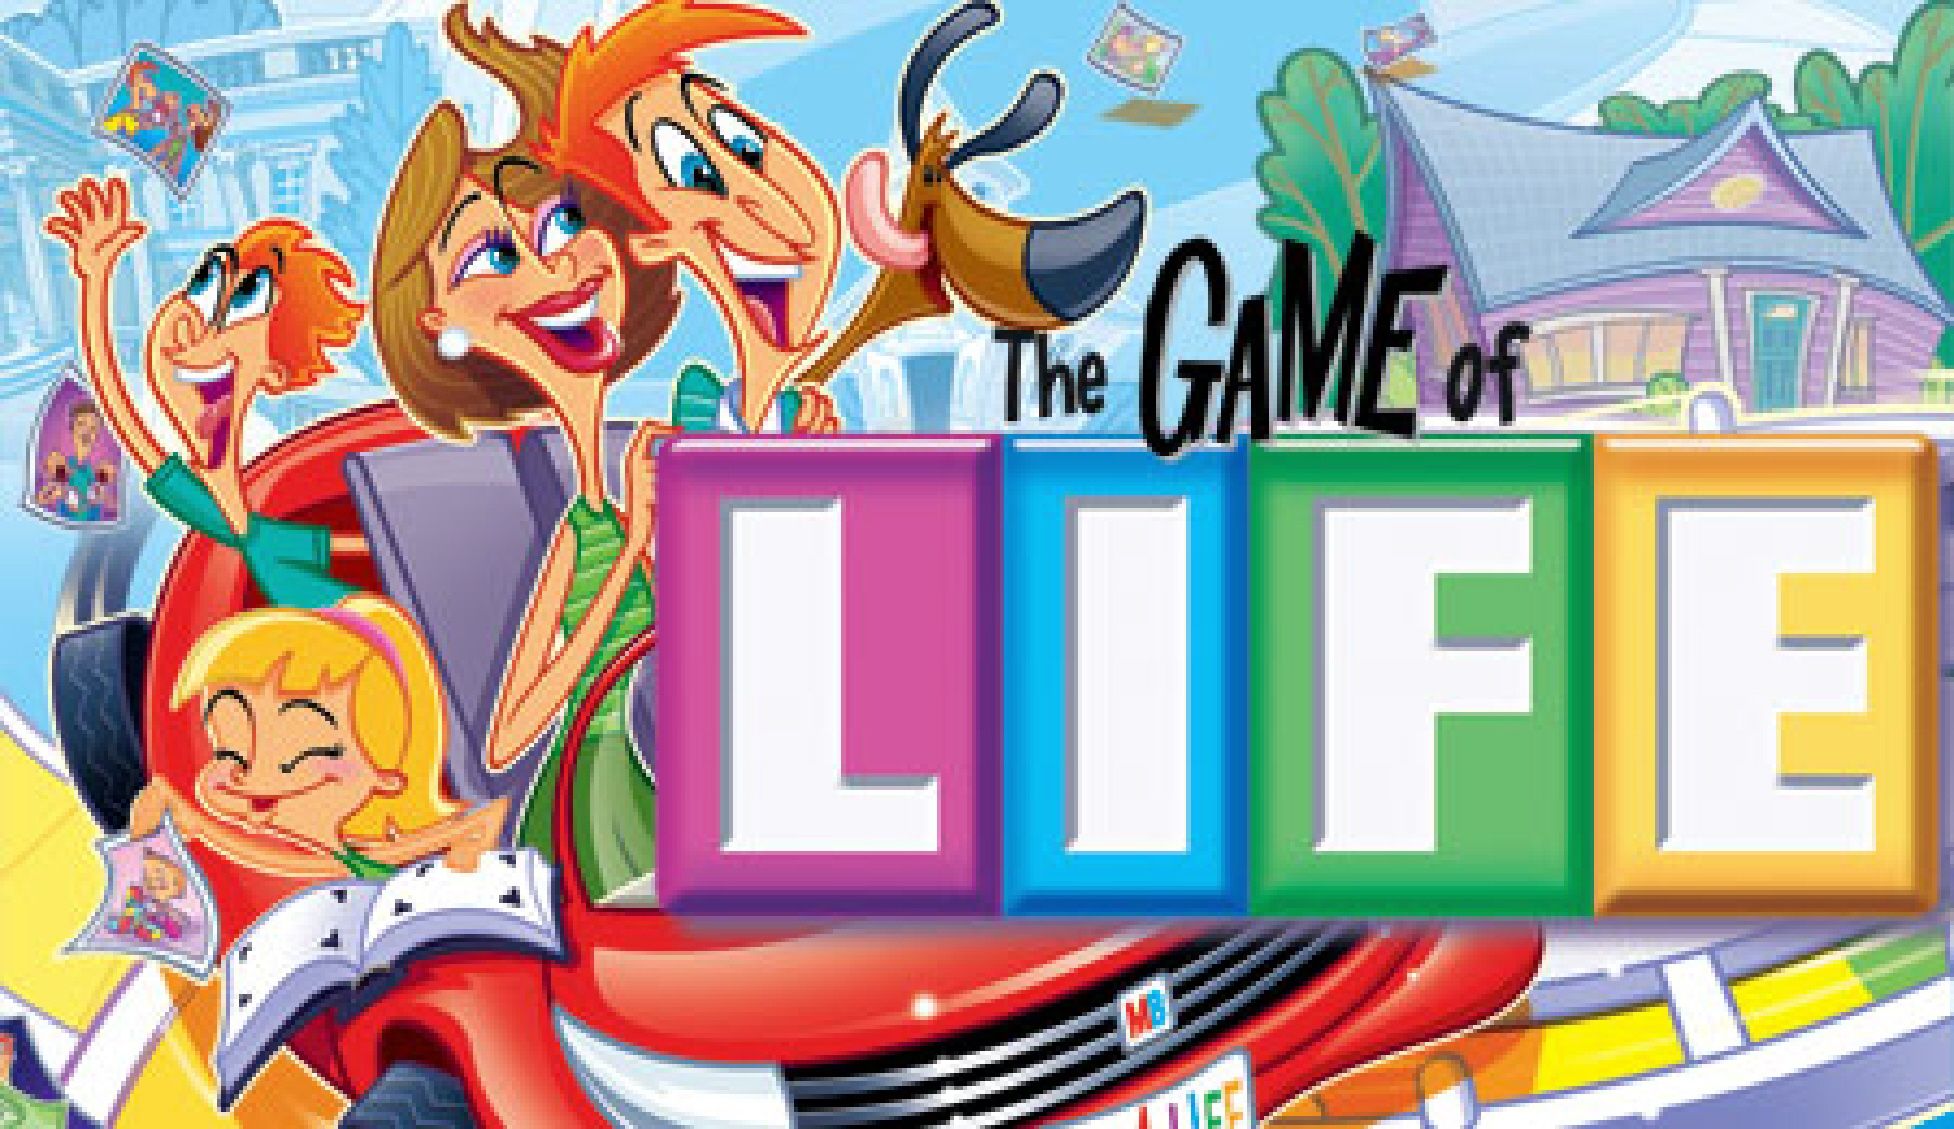 download game of life online